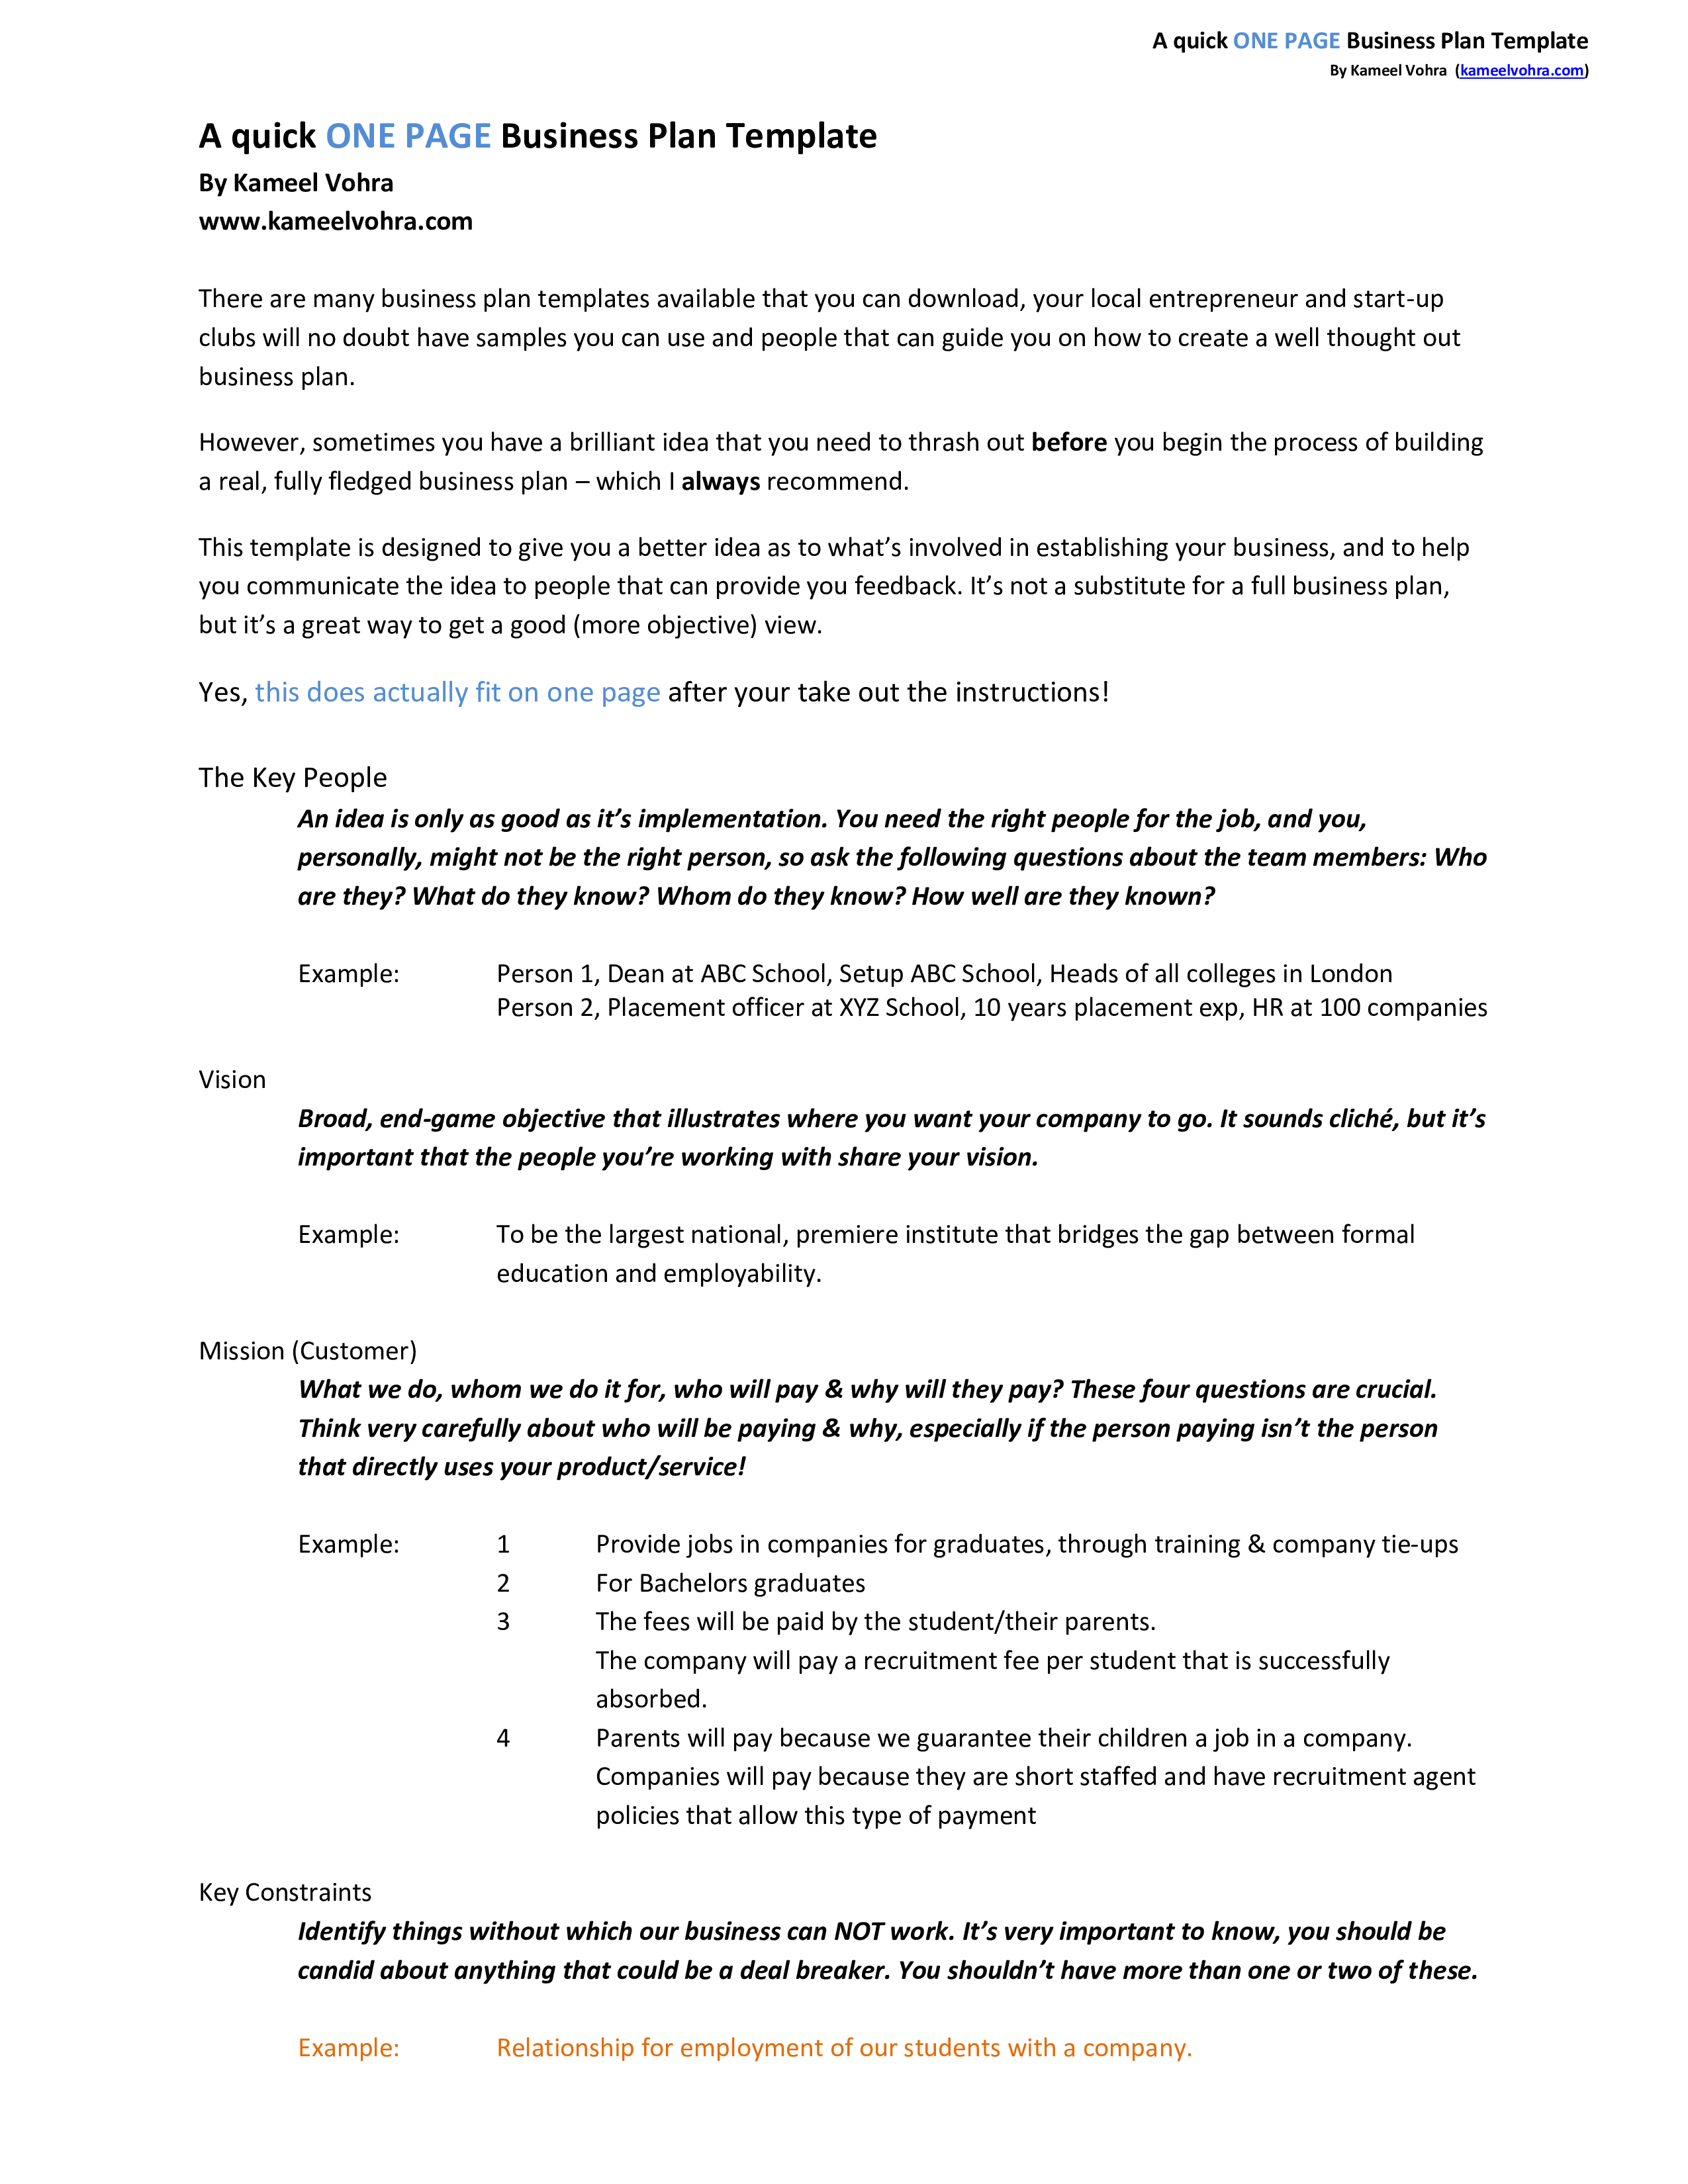 A Quick One Page Business Plan Template - Eloquens Pertaining To One Year Business Plan Template